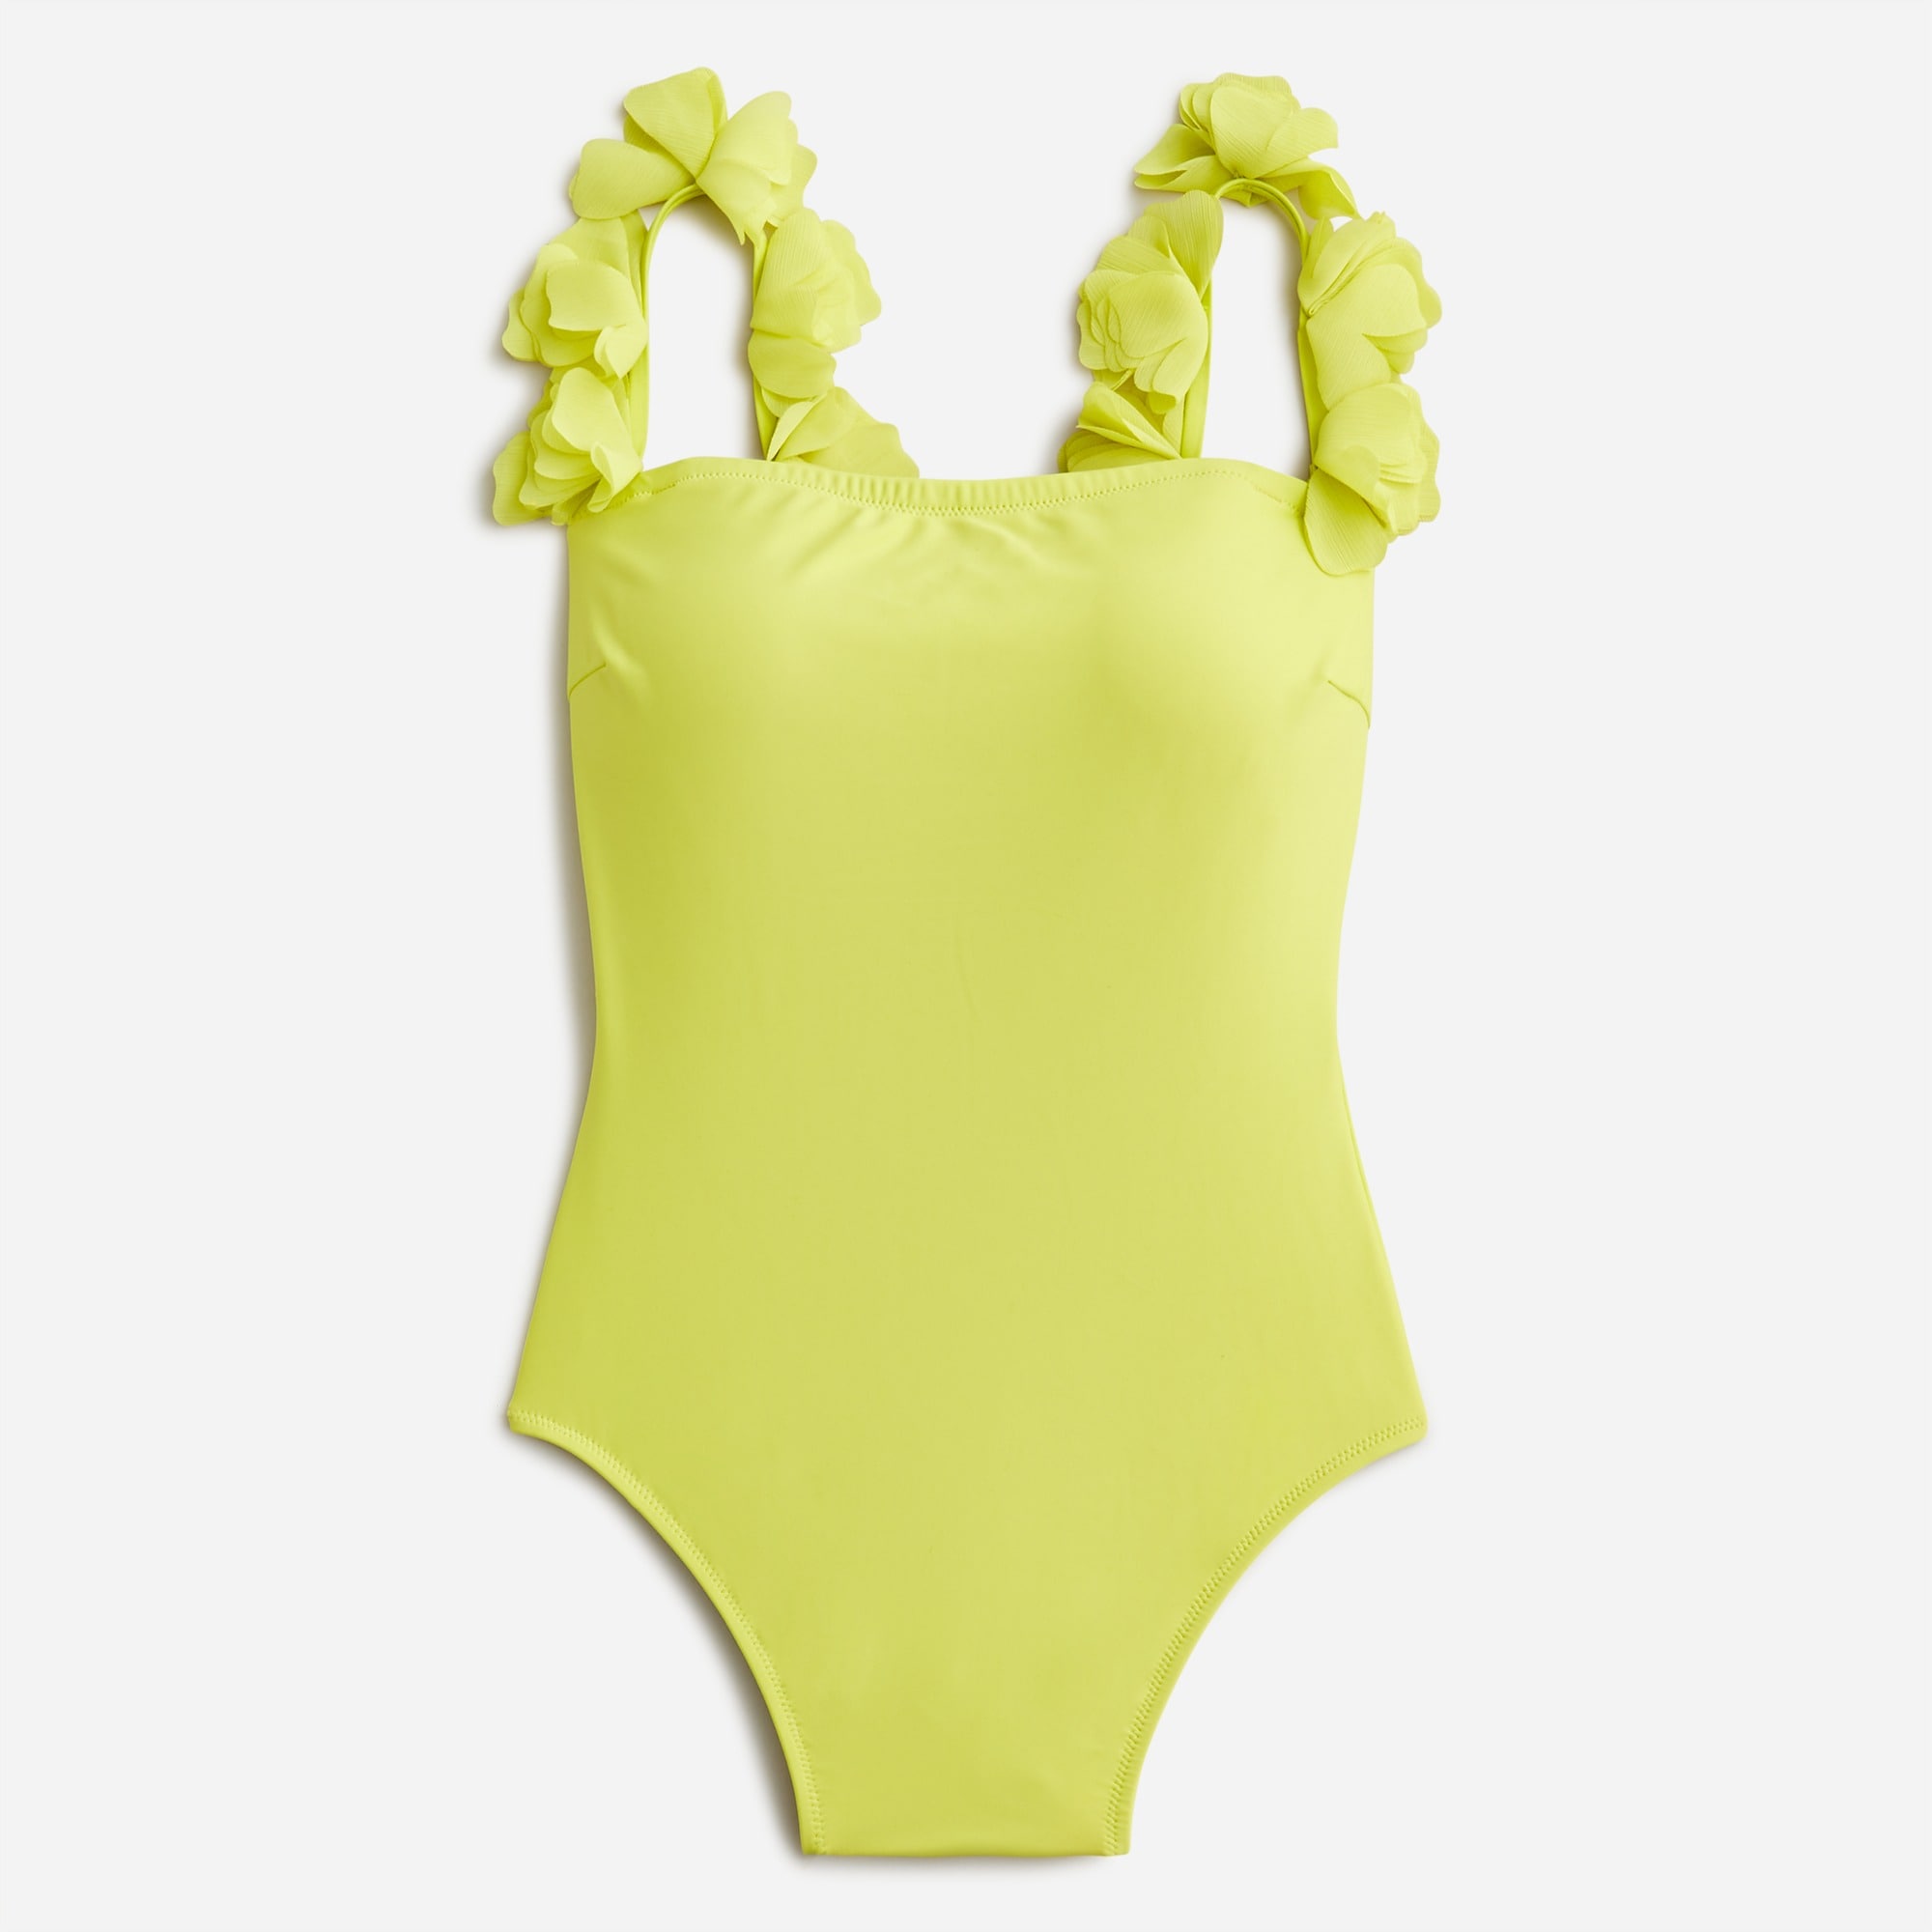 J. Crew Ruched Back one Piece Neon Flamgino Coral Bathing Suit Size 8